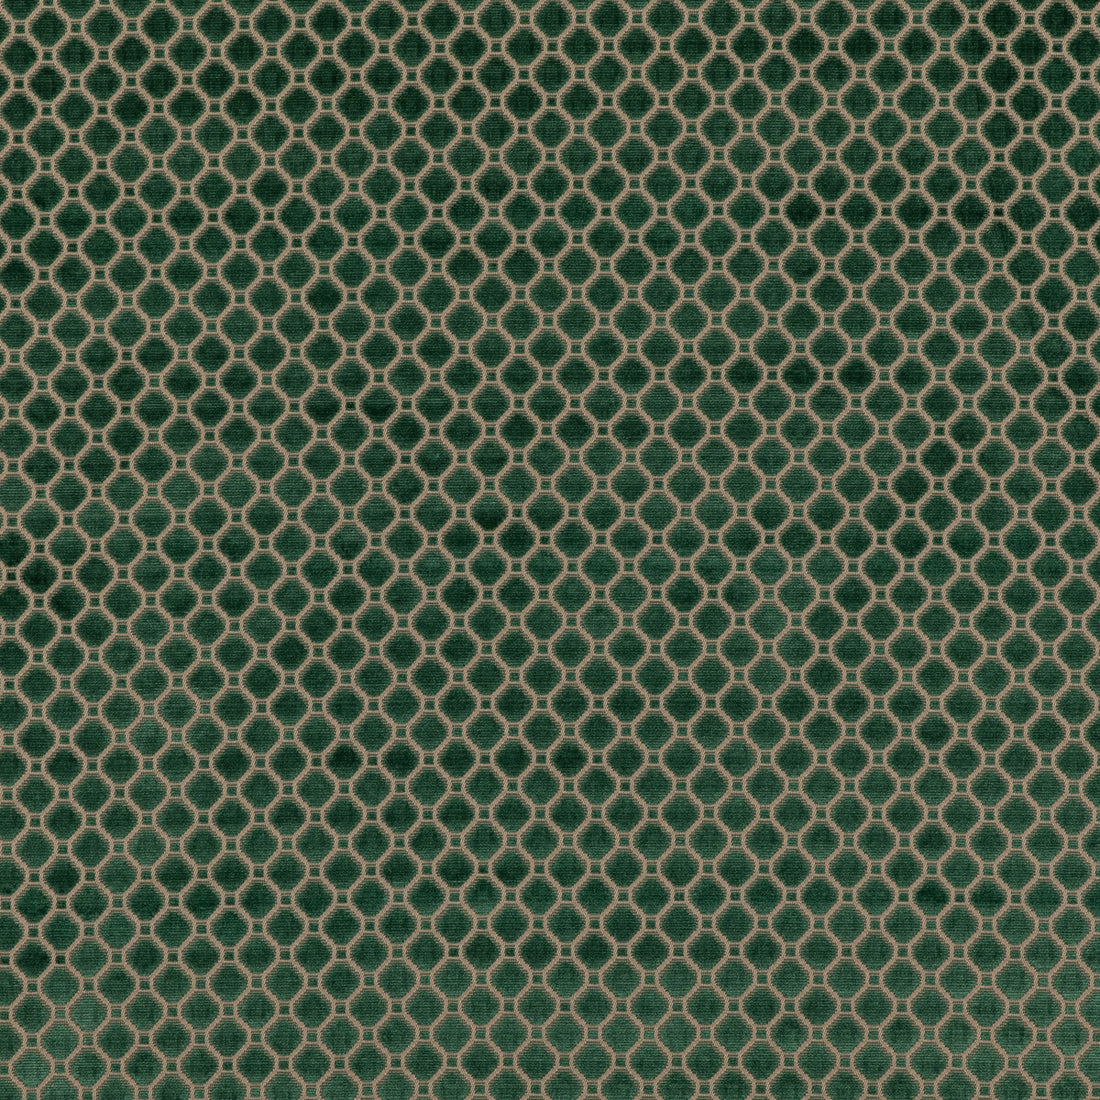 Indus Velvet fabric in emerald color - pattern BF10826.785.0 - by G P &amp; J Baker in the Coromandel Velvets collection